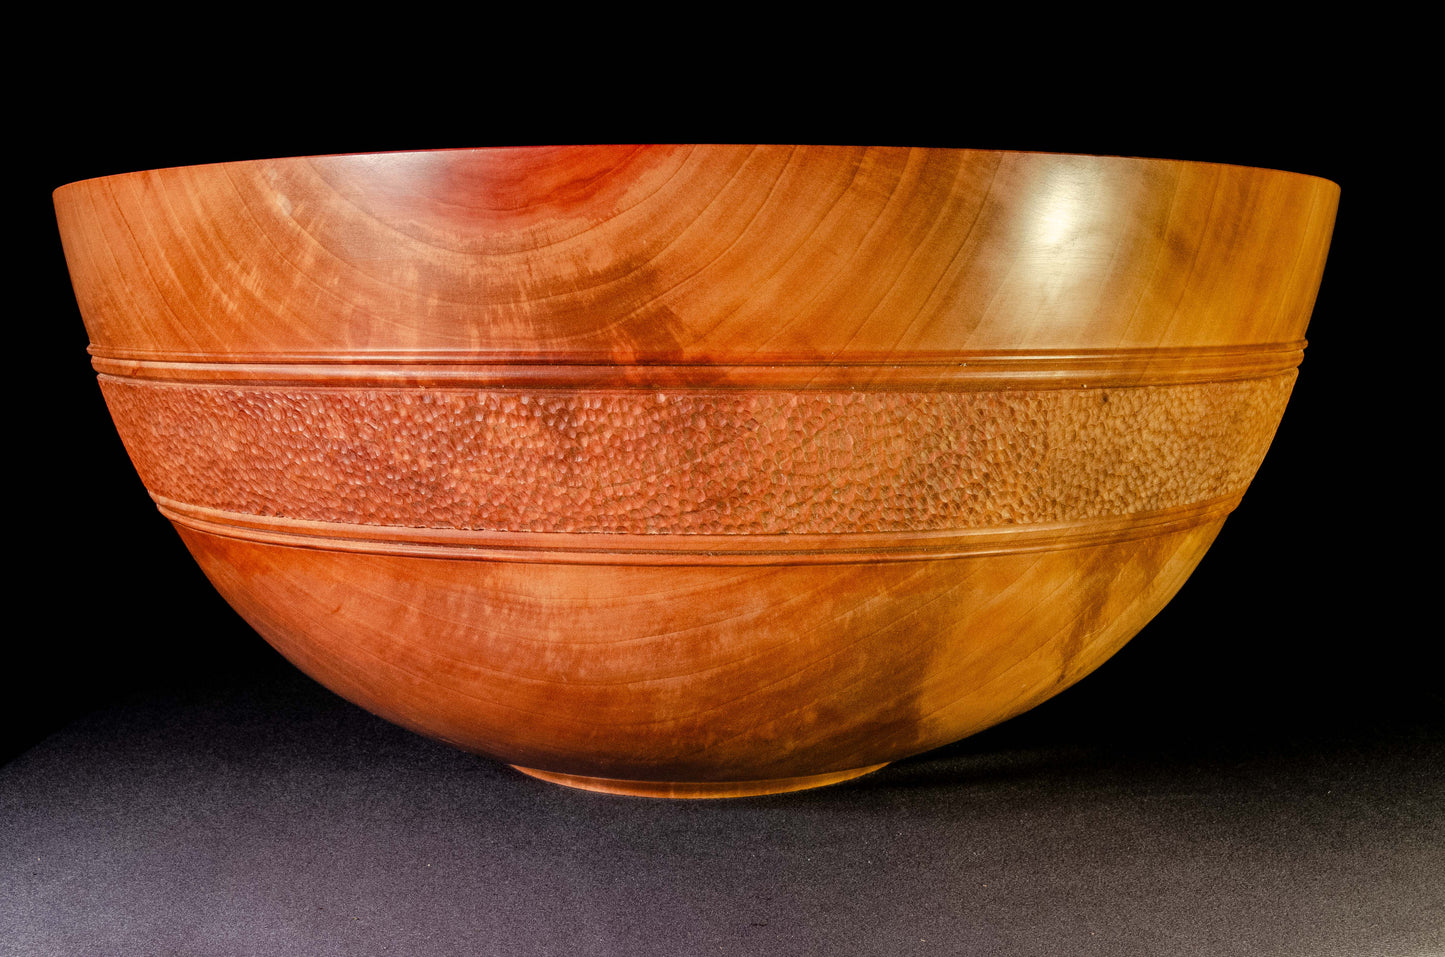 Large bowl of Pear wood with wwell-defined grain patterns. A belt of hand textured stippling encircles the bowl exterior, providing a strong visual balance and focal point. This is an heirloom bowl intended as a special gift.